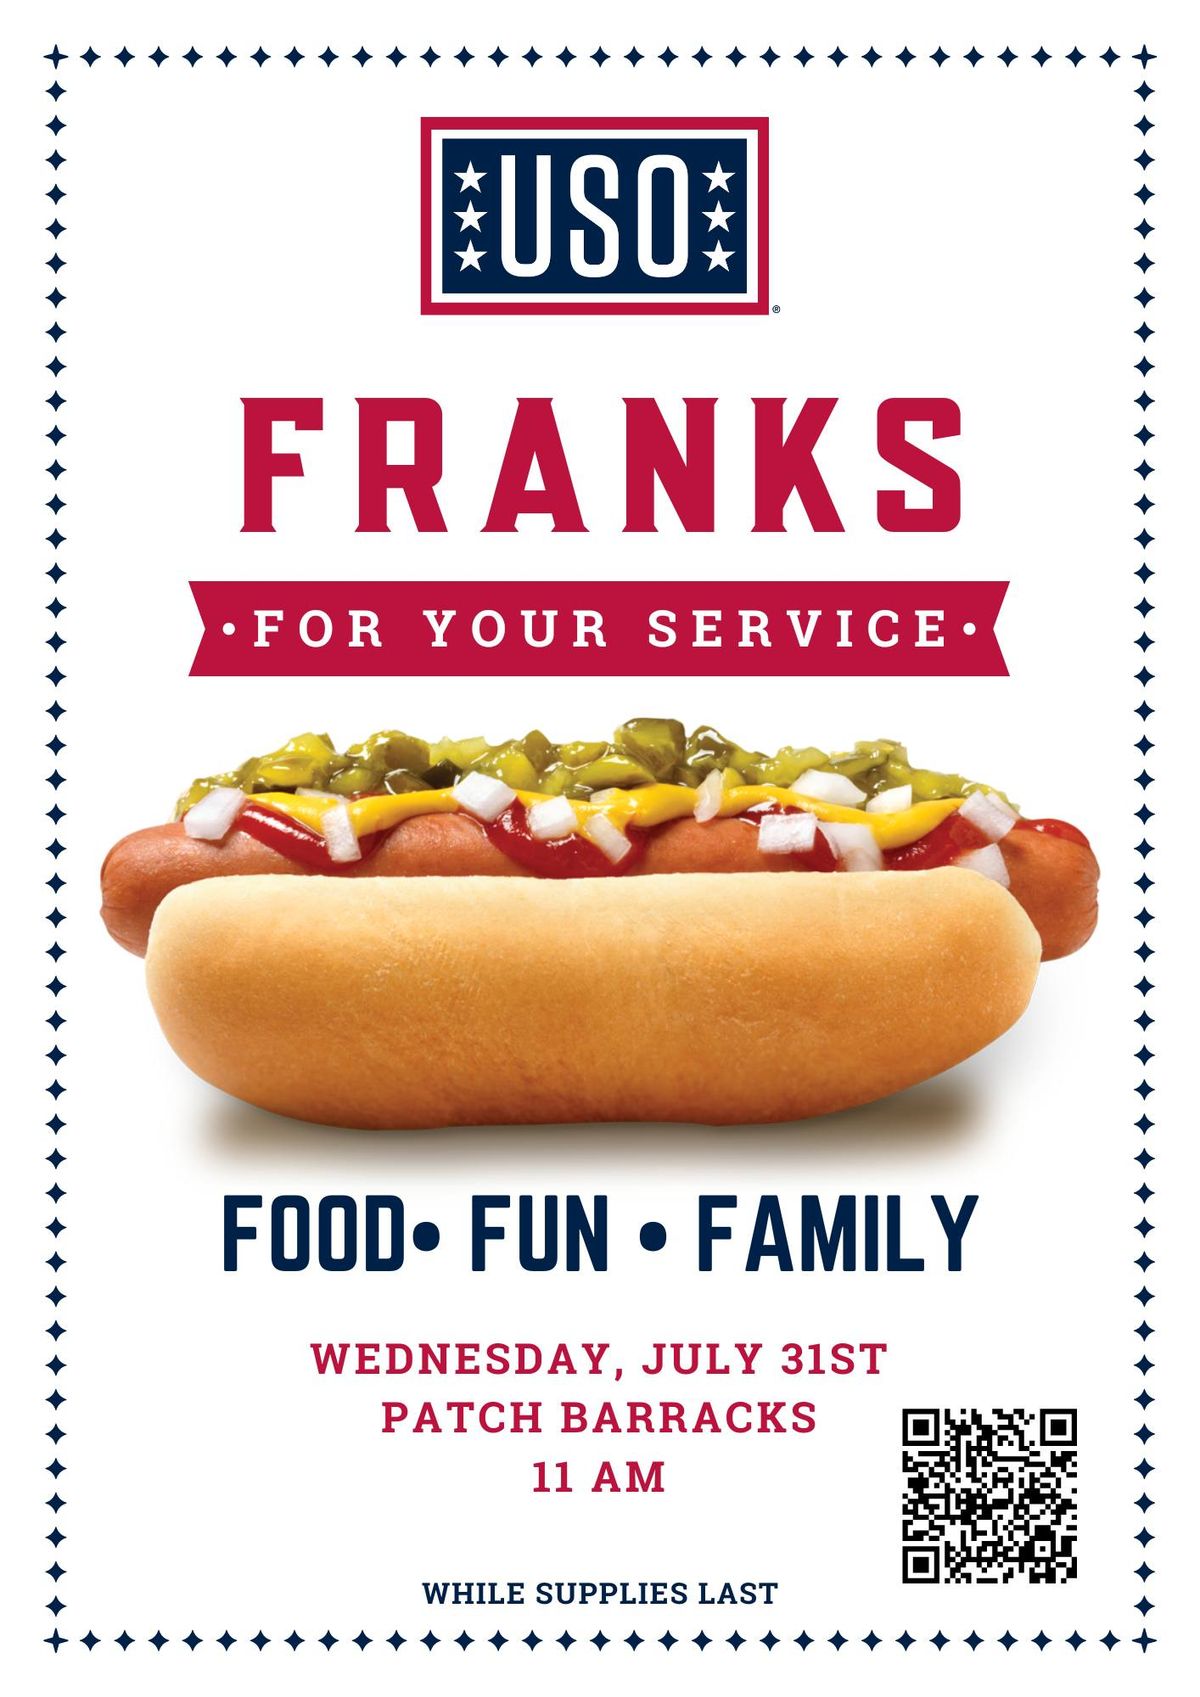 Franks For Your Service - Patch